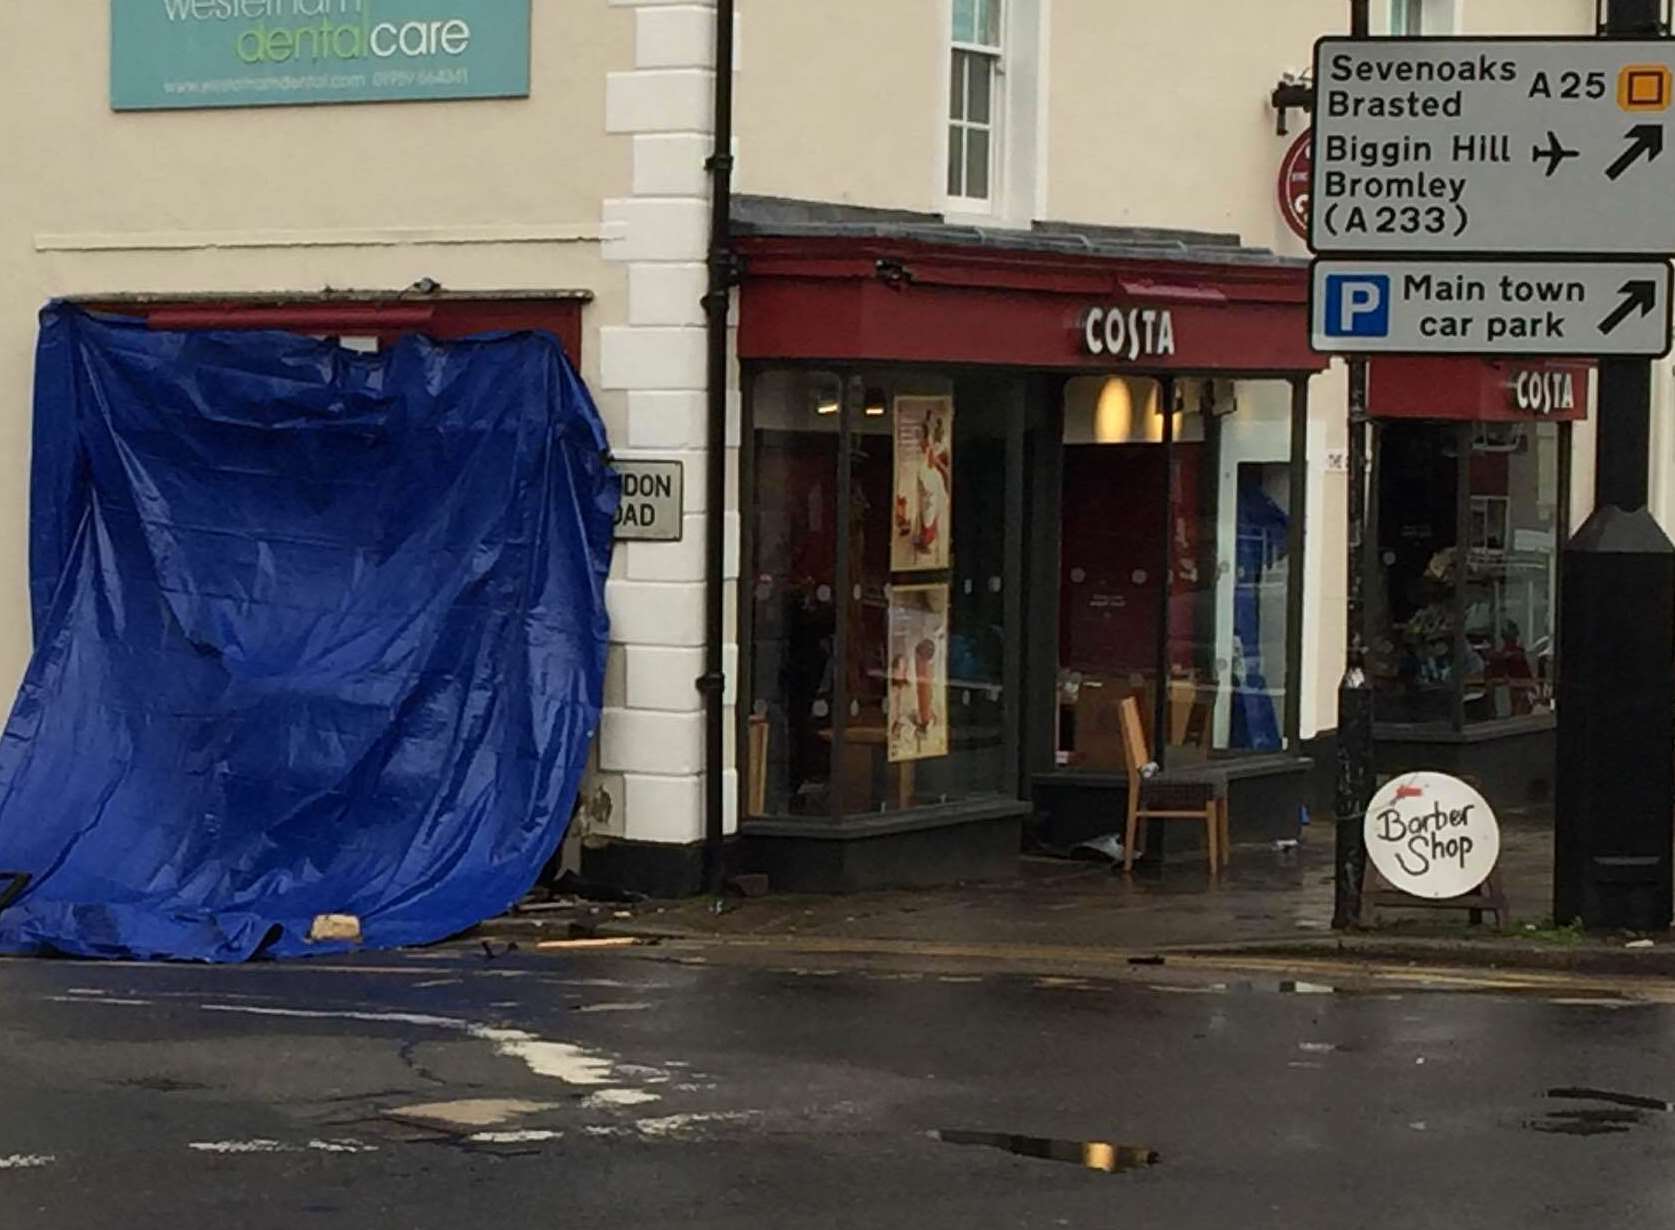 A man has appeared in court charged with dangerous driving after a car crashed into Costa, Westerham